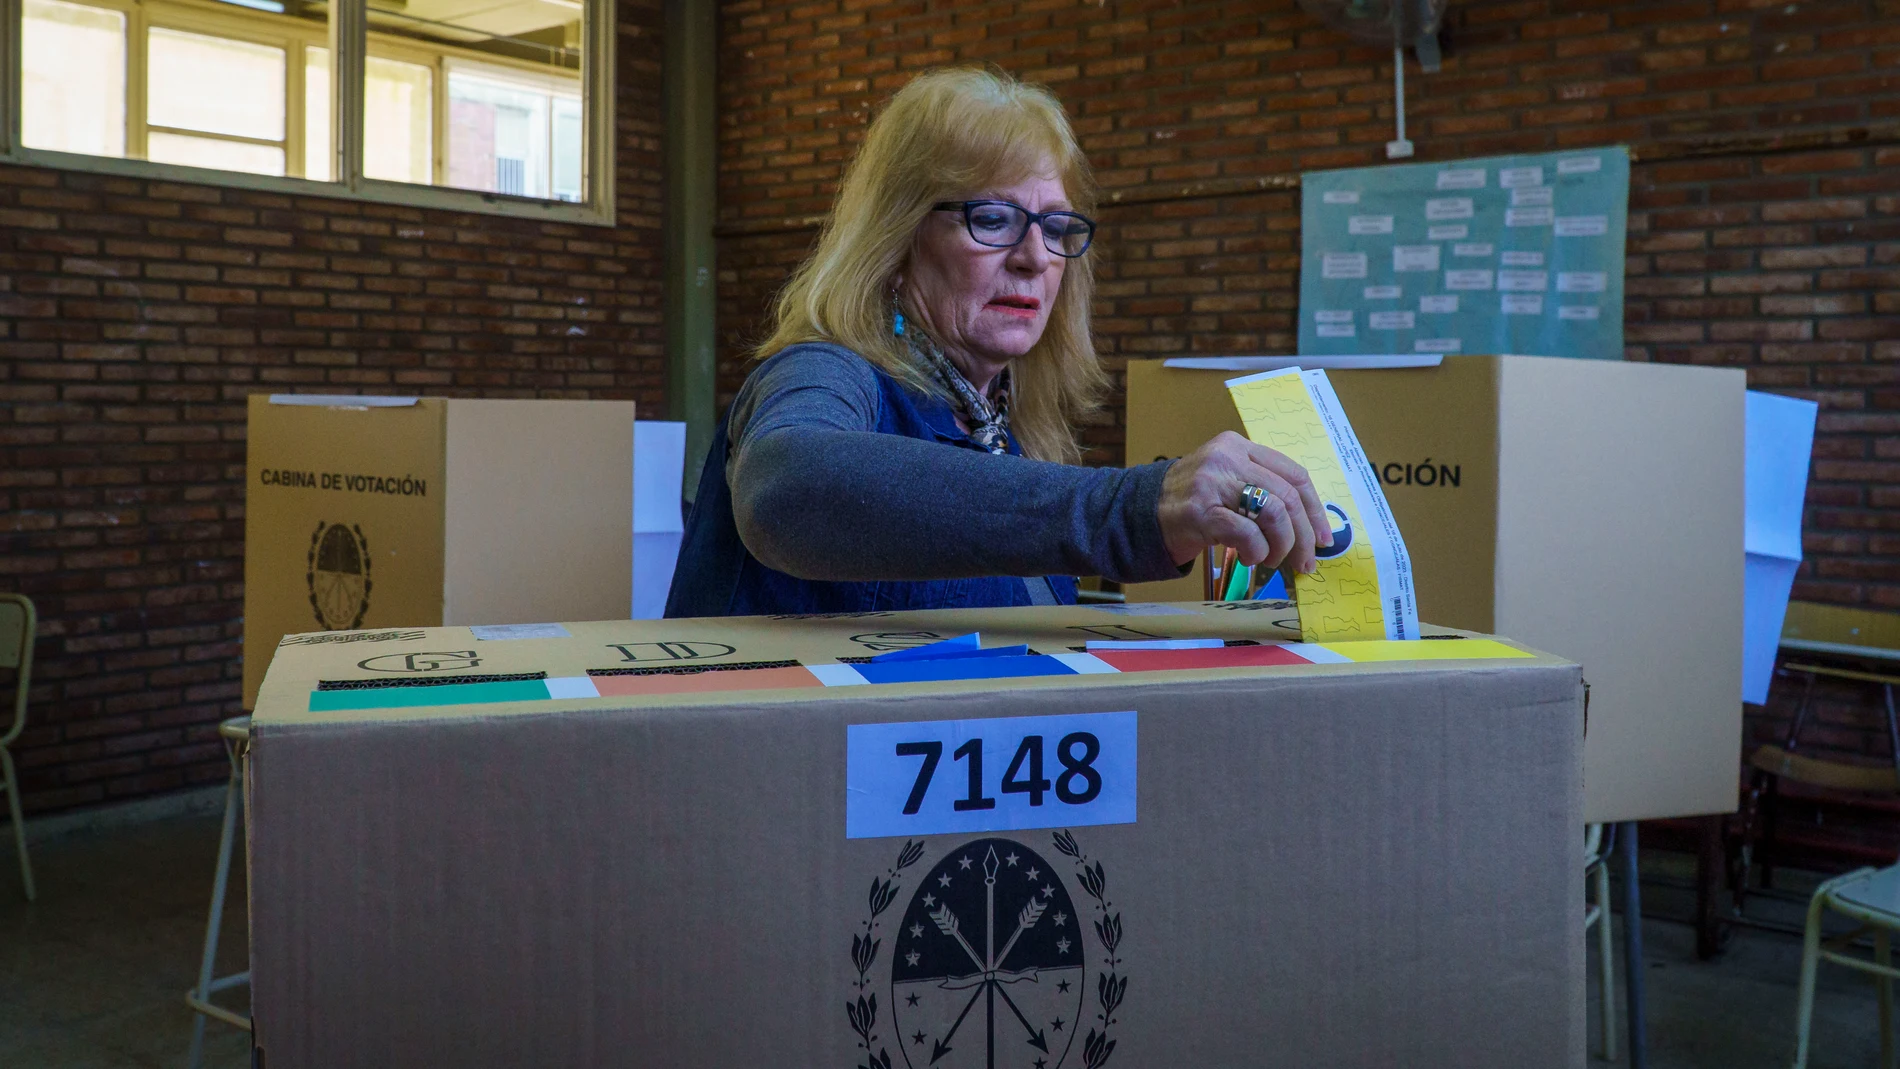 July 16, 2023, Firmat, Santa Fe, Argentina: A woman casts her vote on the primary elections (PASO)at a polling station in Firmat, Santa Fe. This election is seen as a major test for the opposing coalition Juntos por el Cambio, with Presidential candidates Horacio Rodriguez Larreta and Patricia Bullrich supporting two candidates for Governor, Maximiliano Pullaro and Carolina Losada respectively, that have engaged in a battle that escalated to the point of accusing Pullaro of complicity with dr...